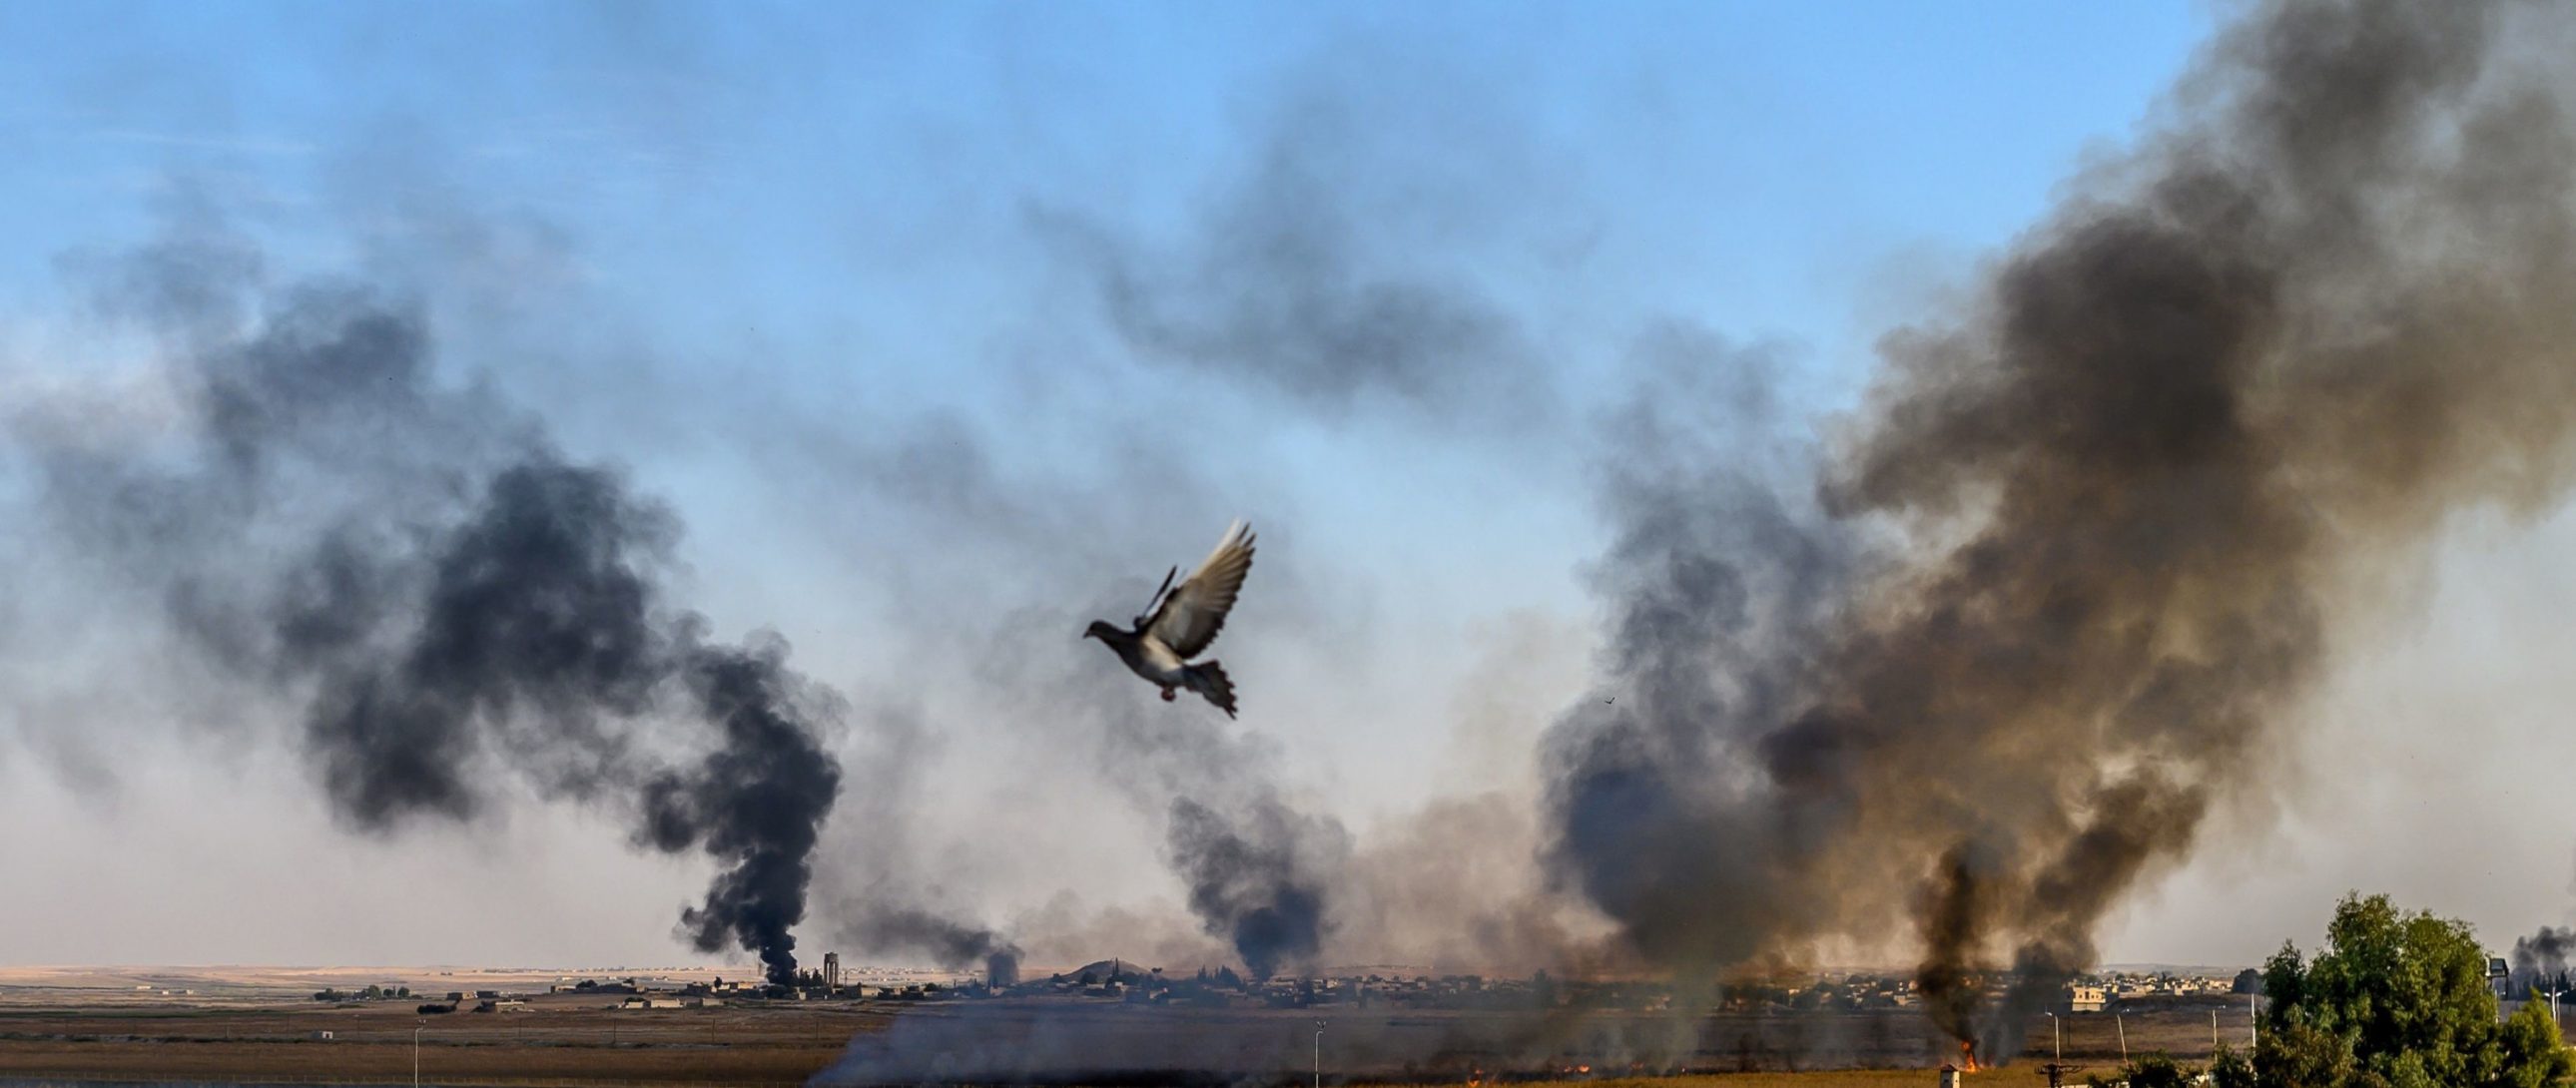 Smoke rises from the Syrian town of Tal Abyad